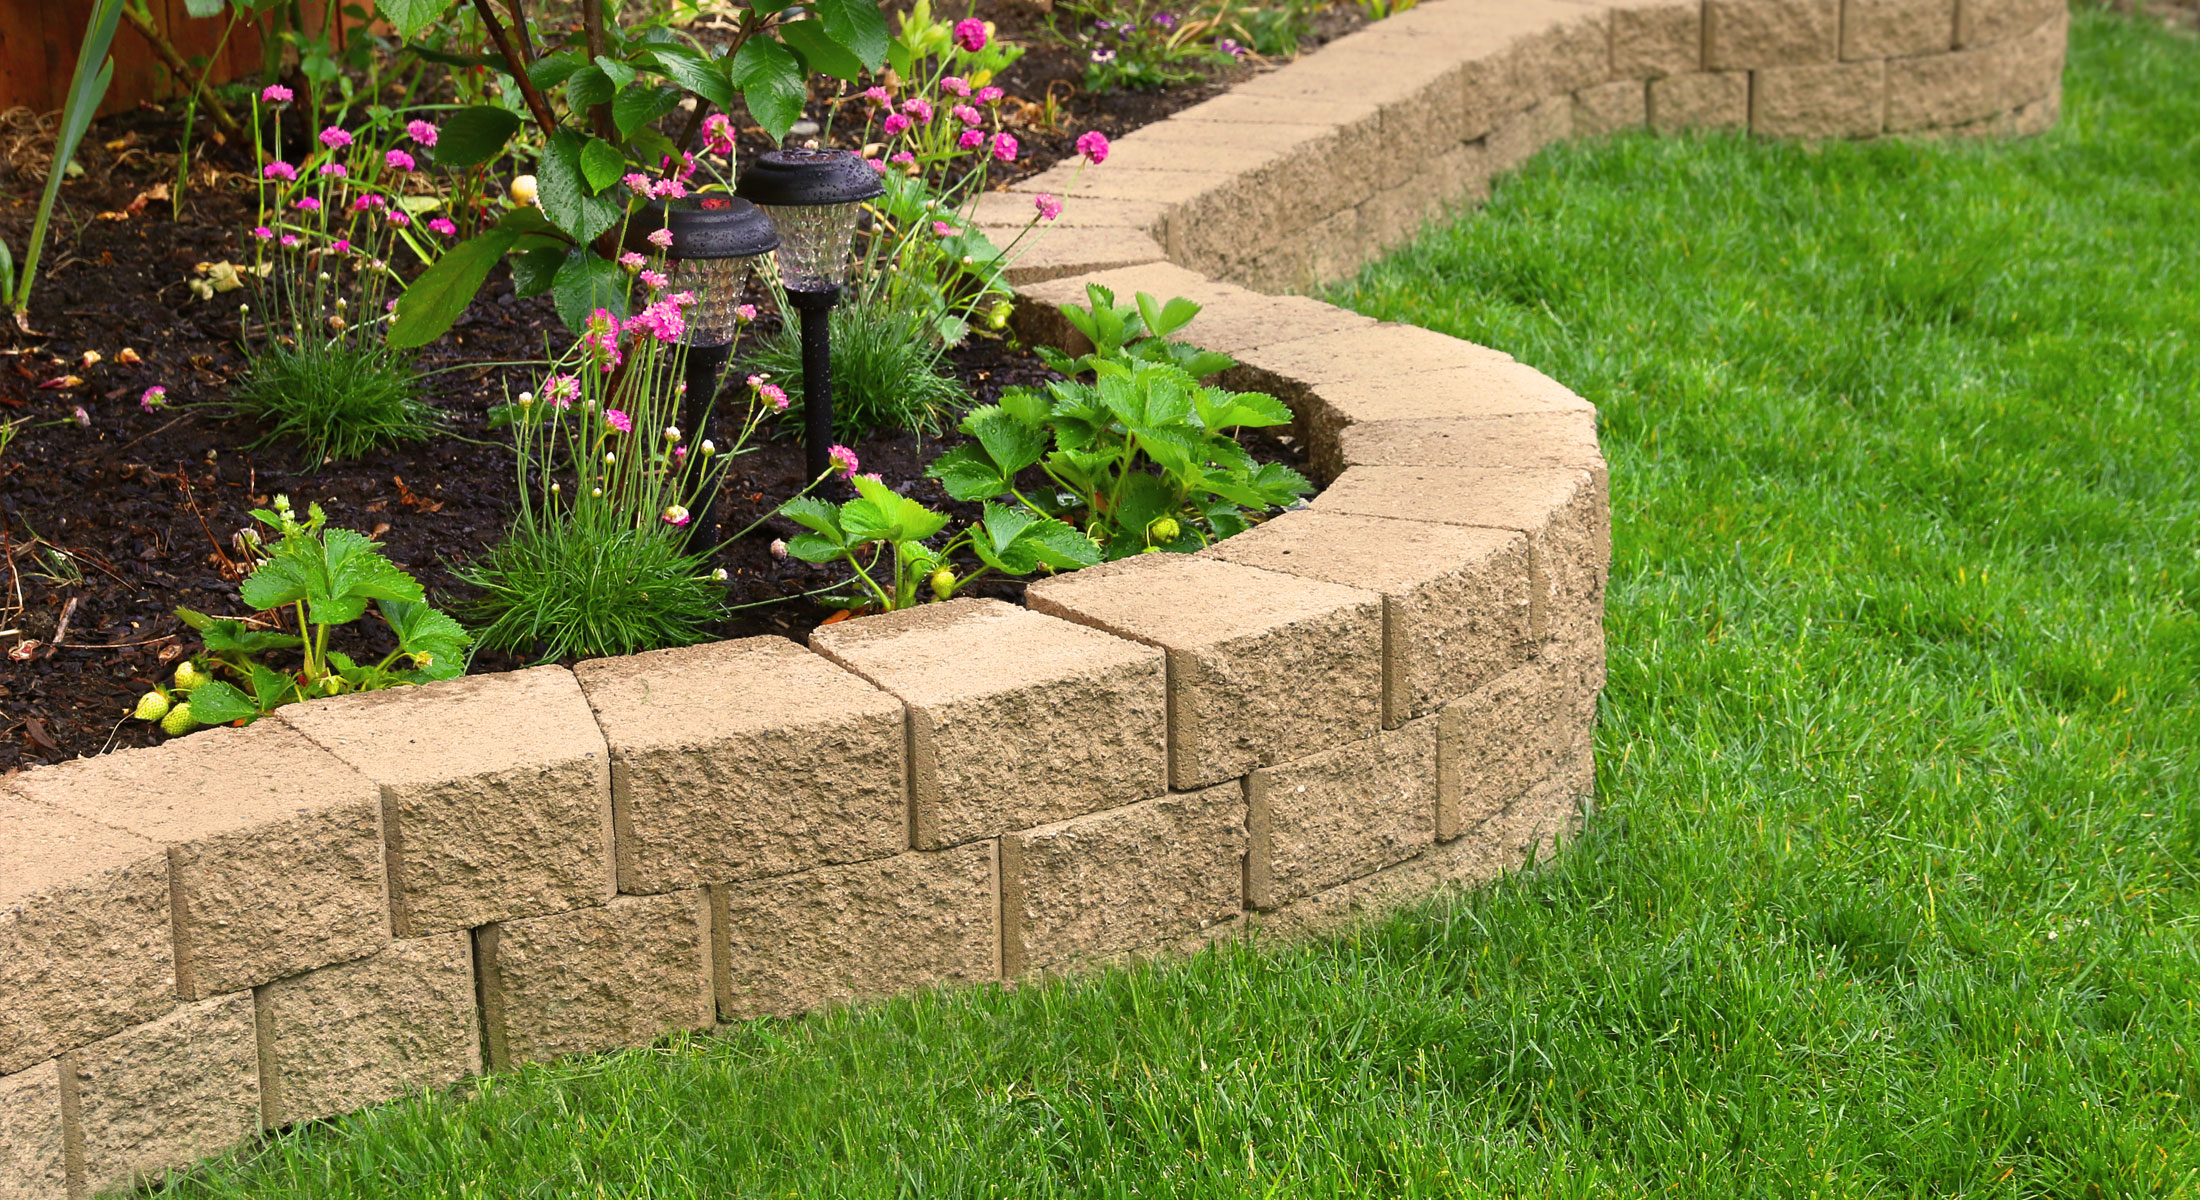  retaining wall landscaping ideas